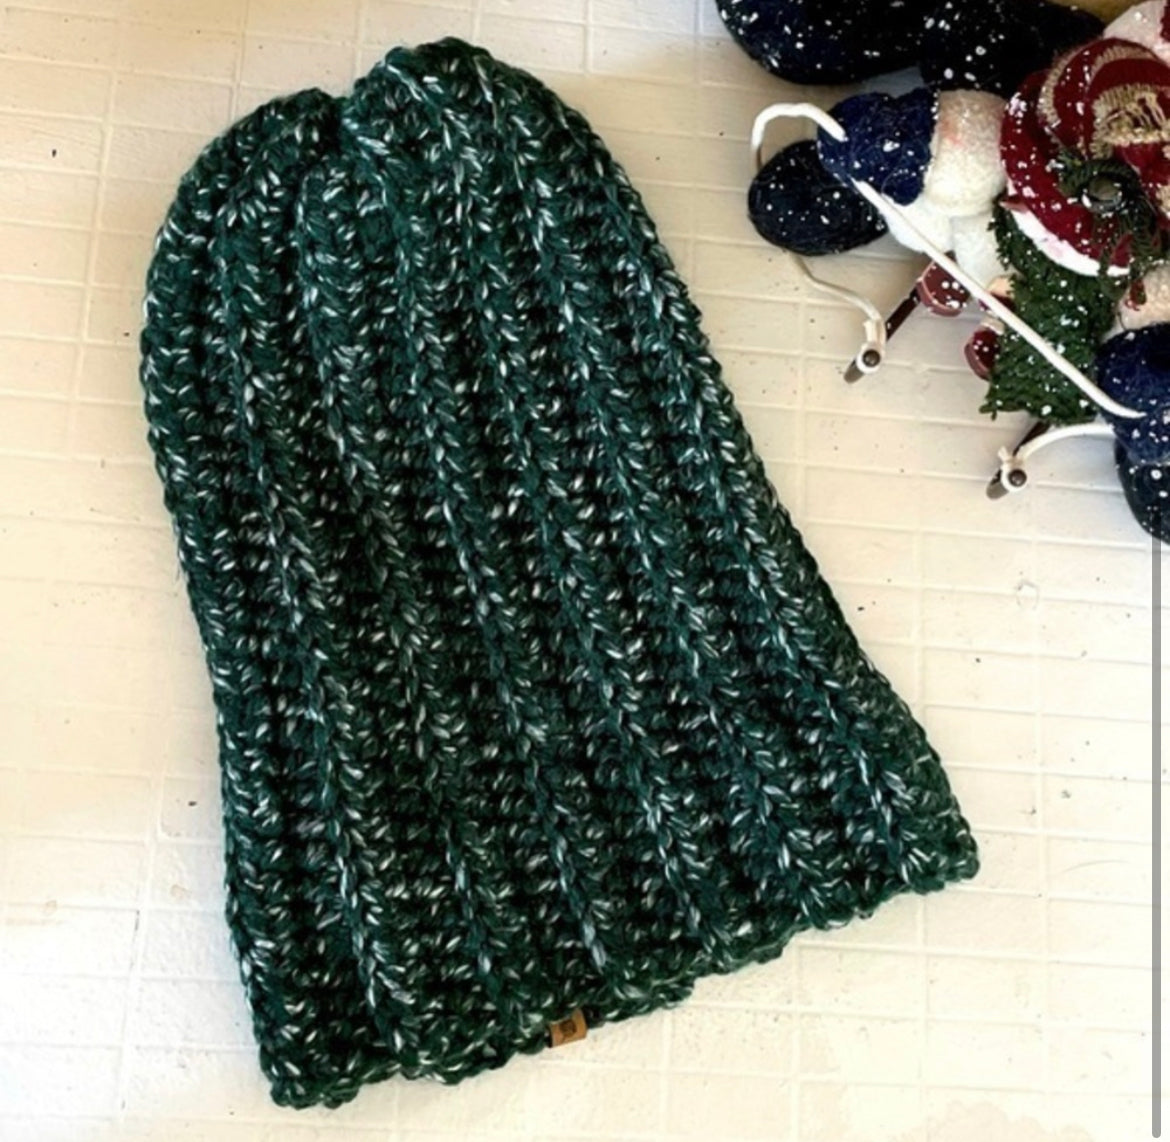 Extra Warm Ribbed Cable Knit Hat Forest Green & White Marbled Hand Crocheted Beanie 21" Winter Unisex Outdoor Stretch Adjustable Cuff